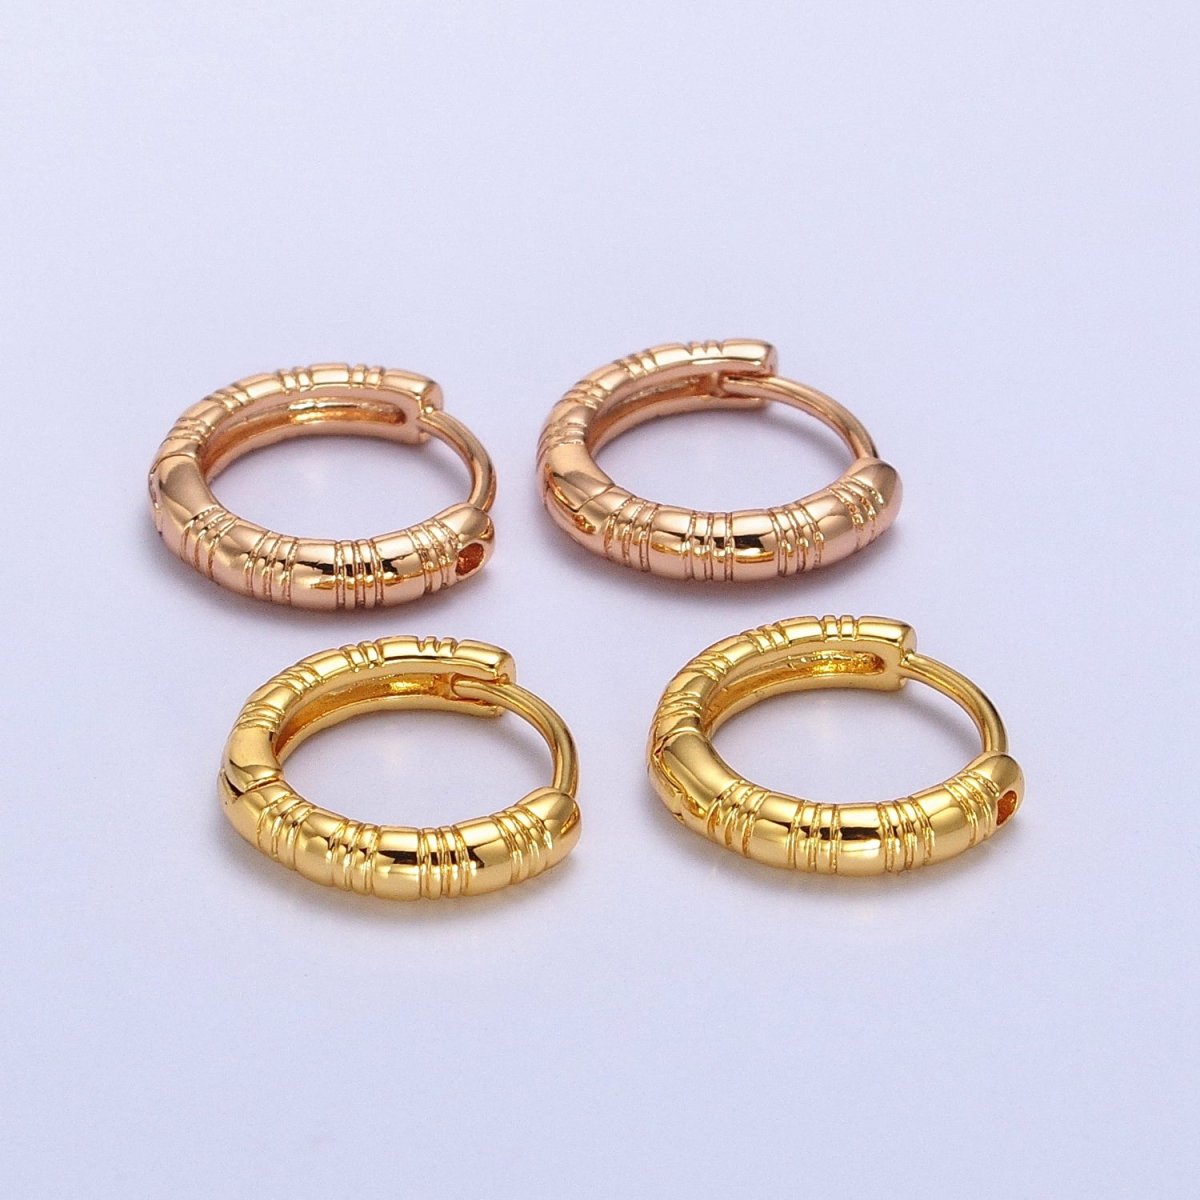 24K, 18K Gold Filled 13mm Textured Lined Huggie Earrings | AB306 AB307 - DLUXCA